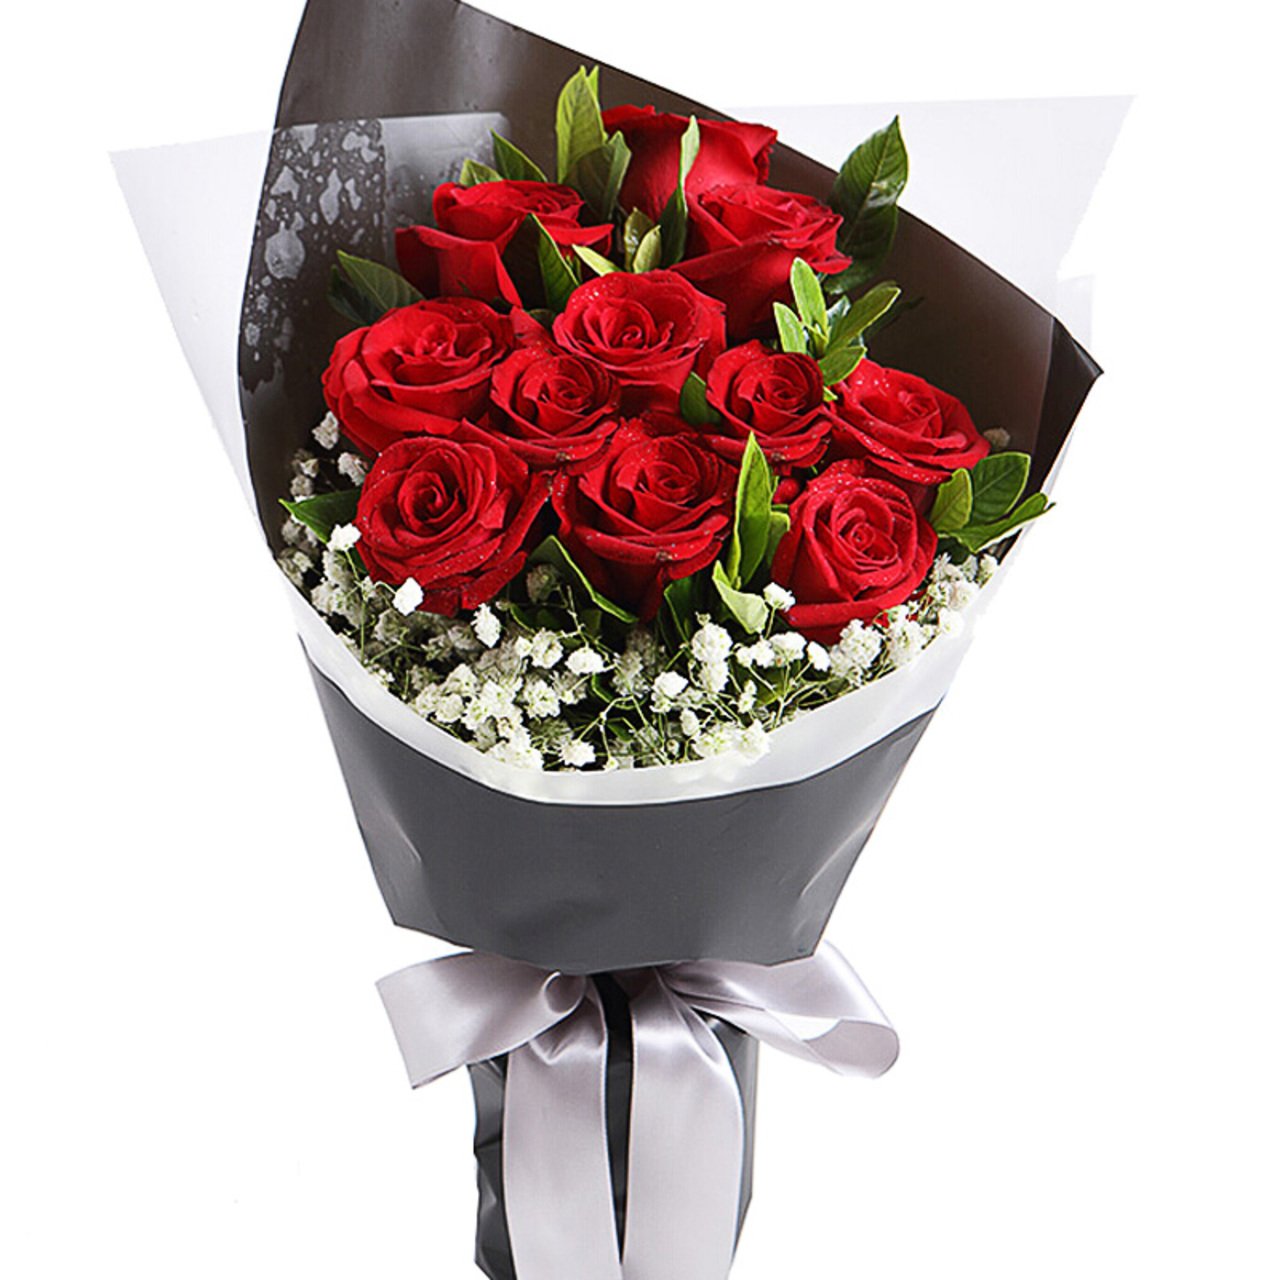 Full of you(
11 red roses-